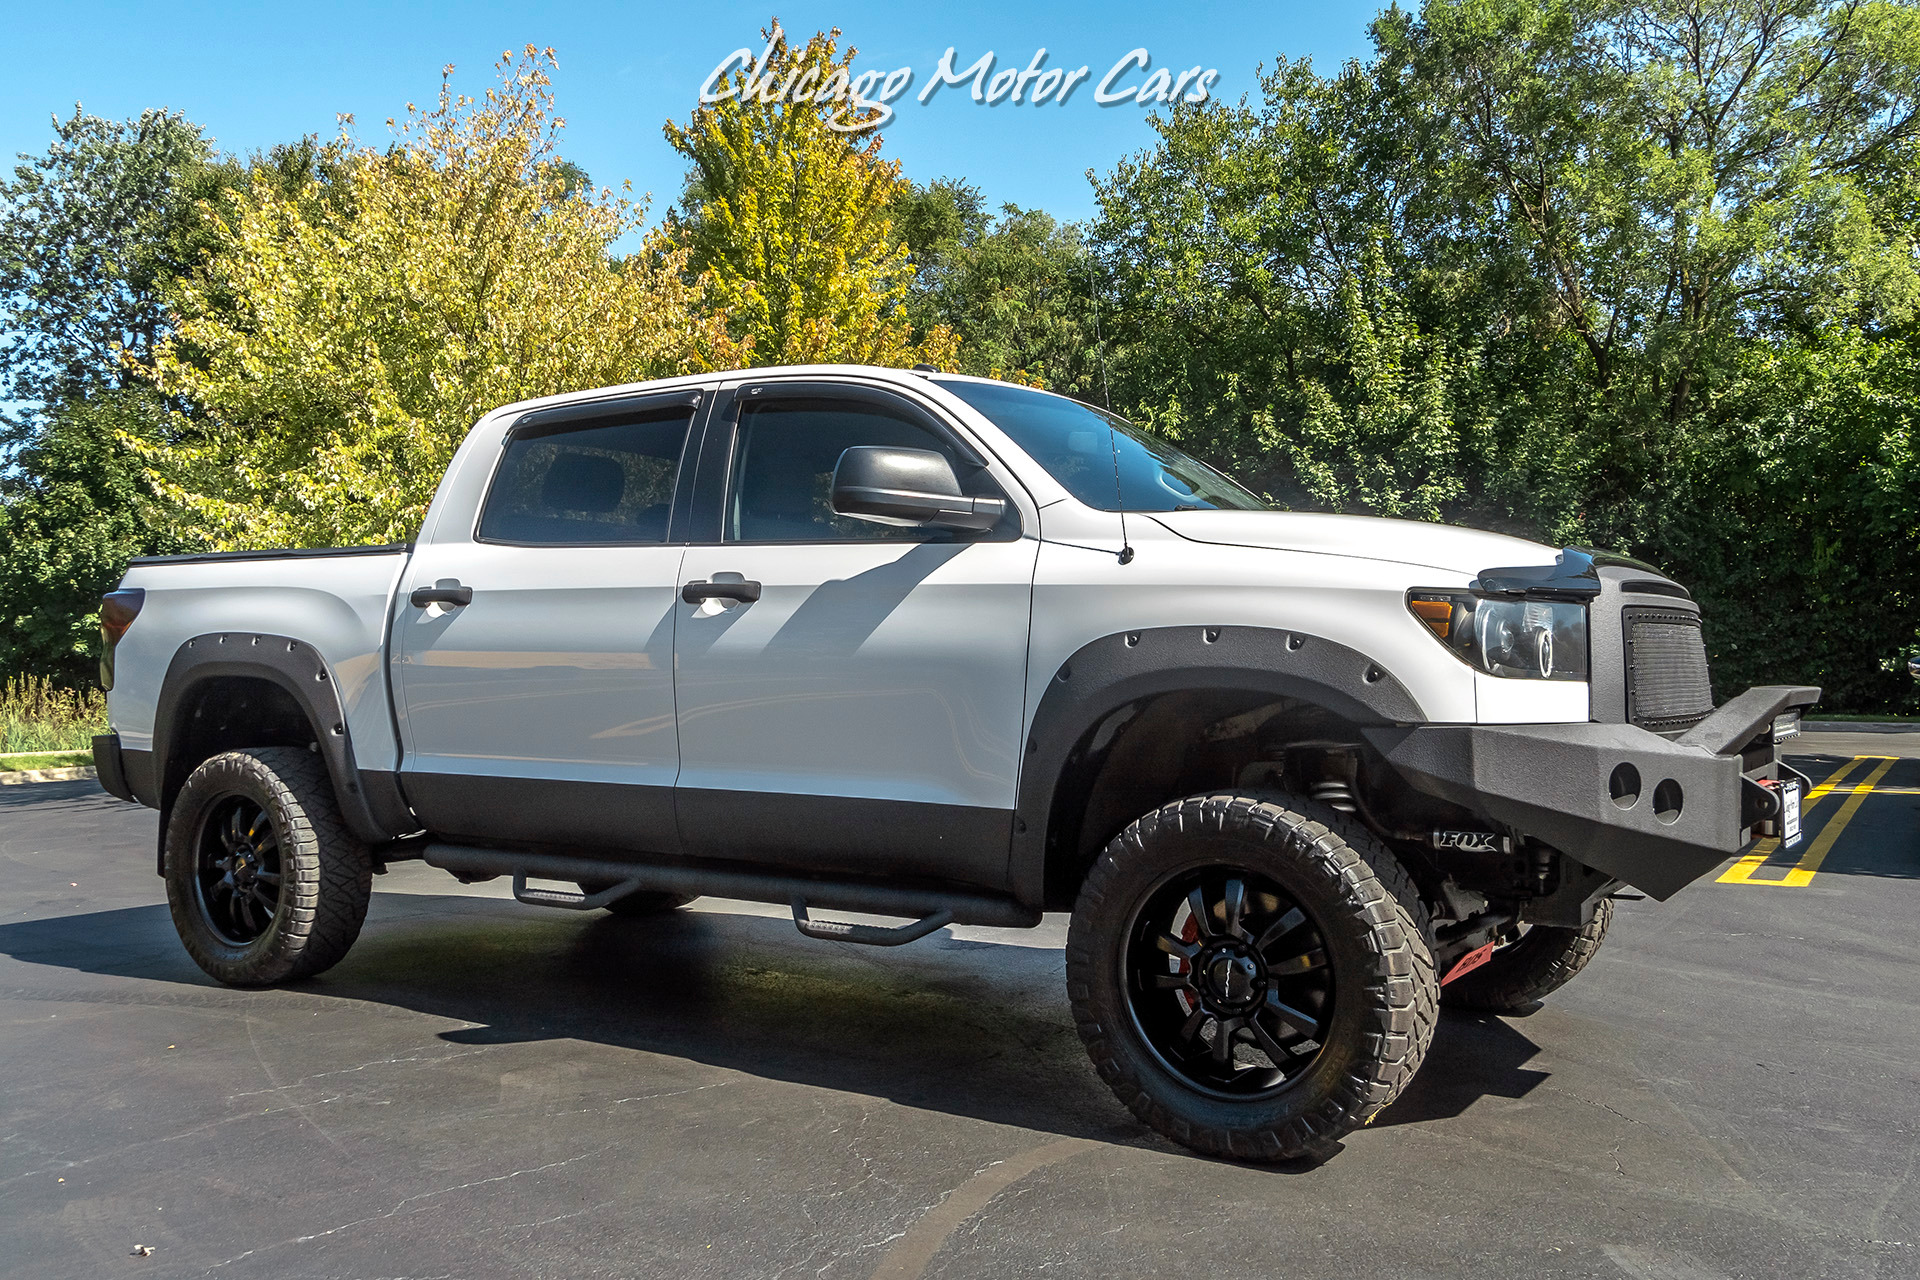 Used 2012 Toyota Tundra Crew Cab TRD Pickup-Truck Supercharged $30K IN ...